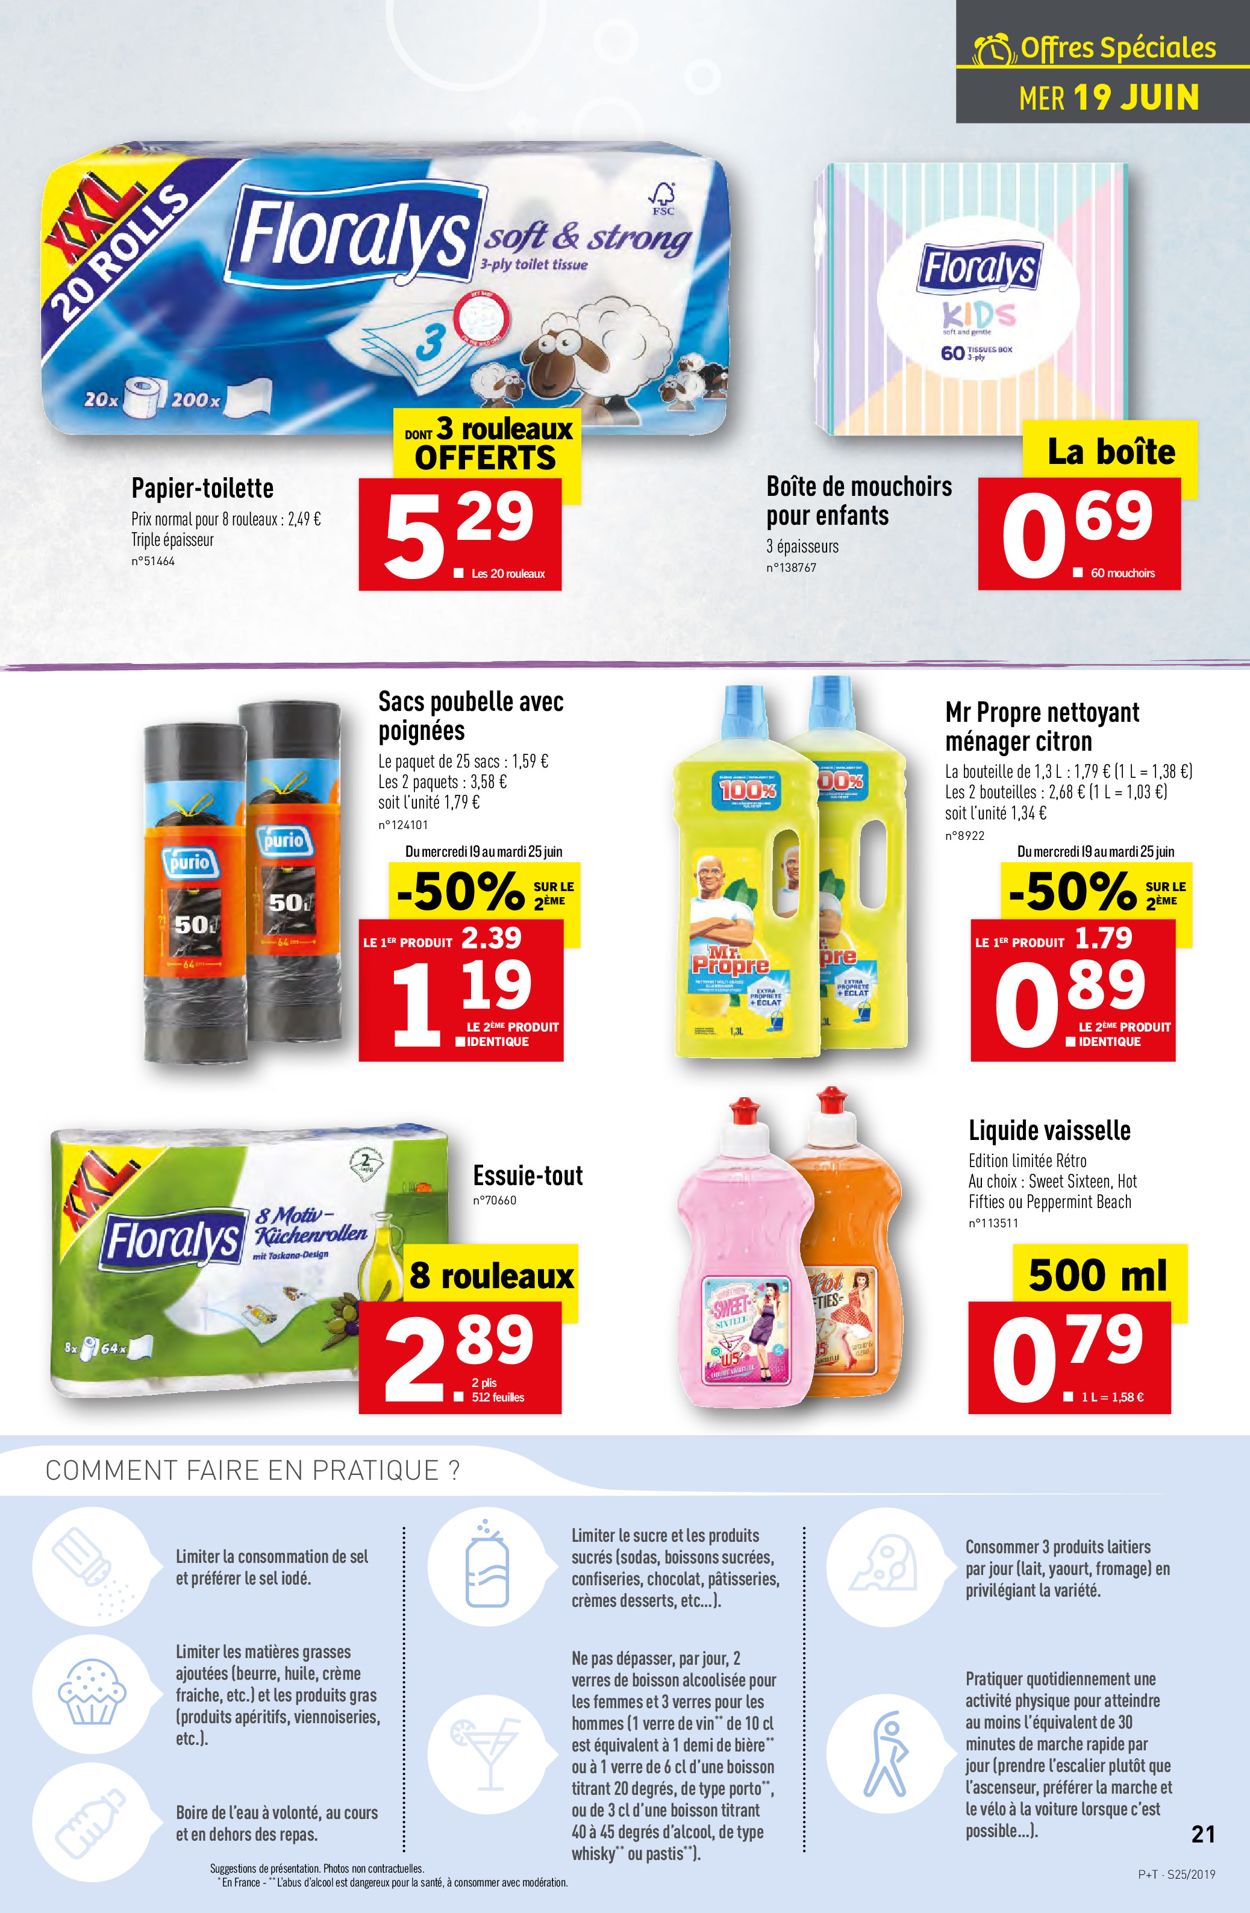 Lidl Catalogue - 19.06-25.06.2019 (Page 23)